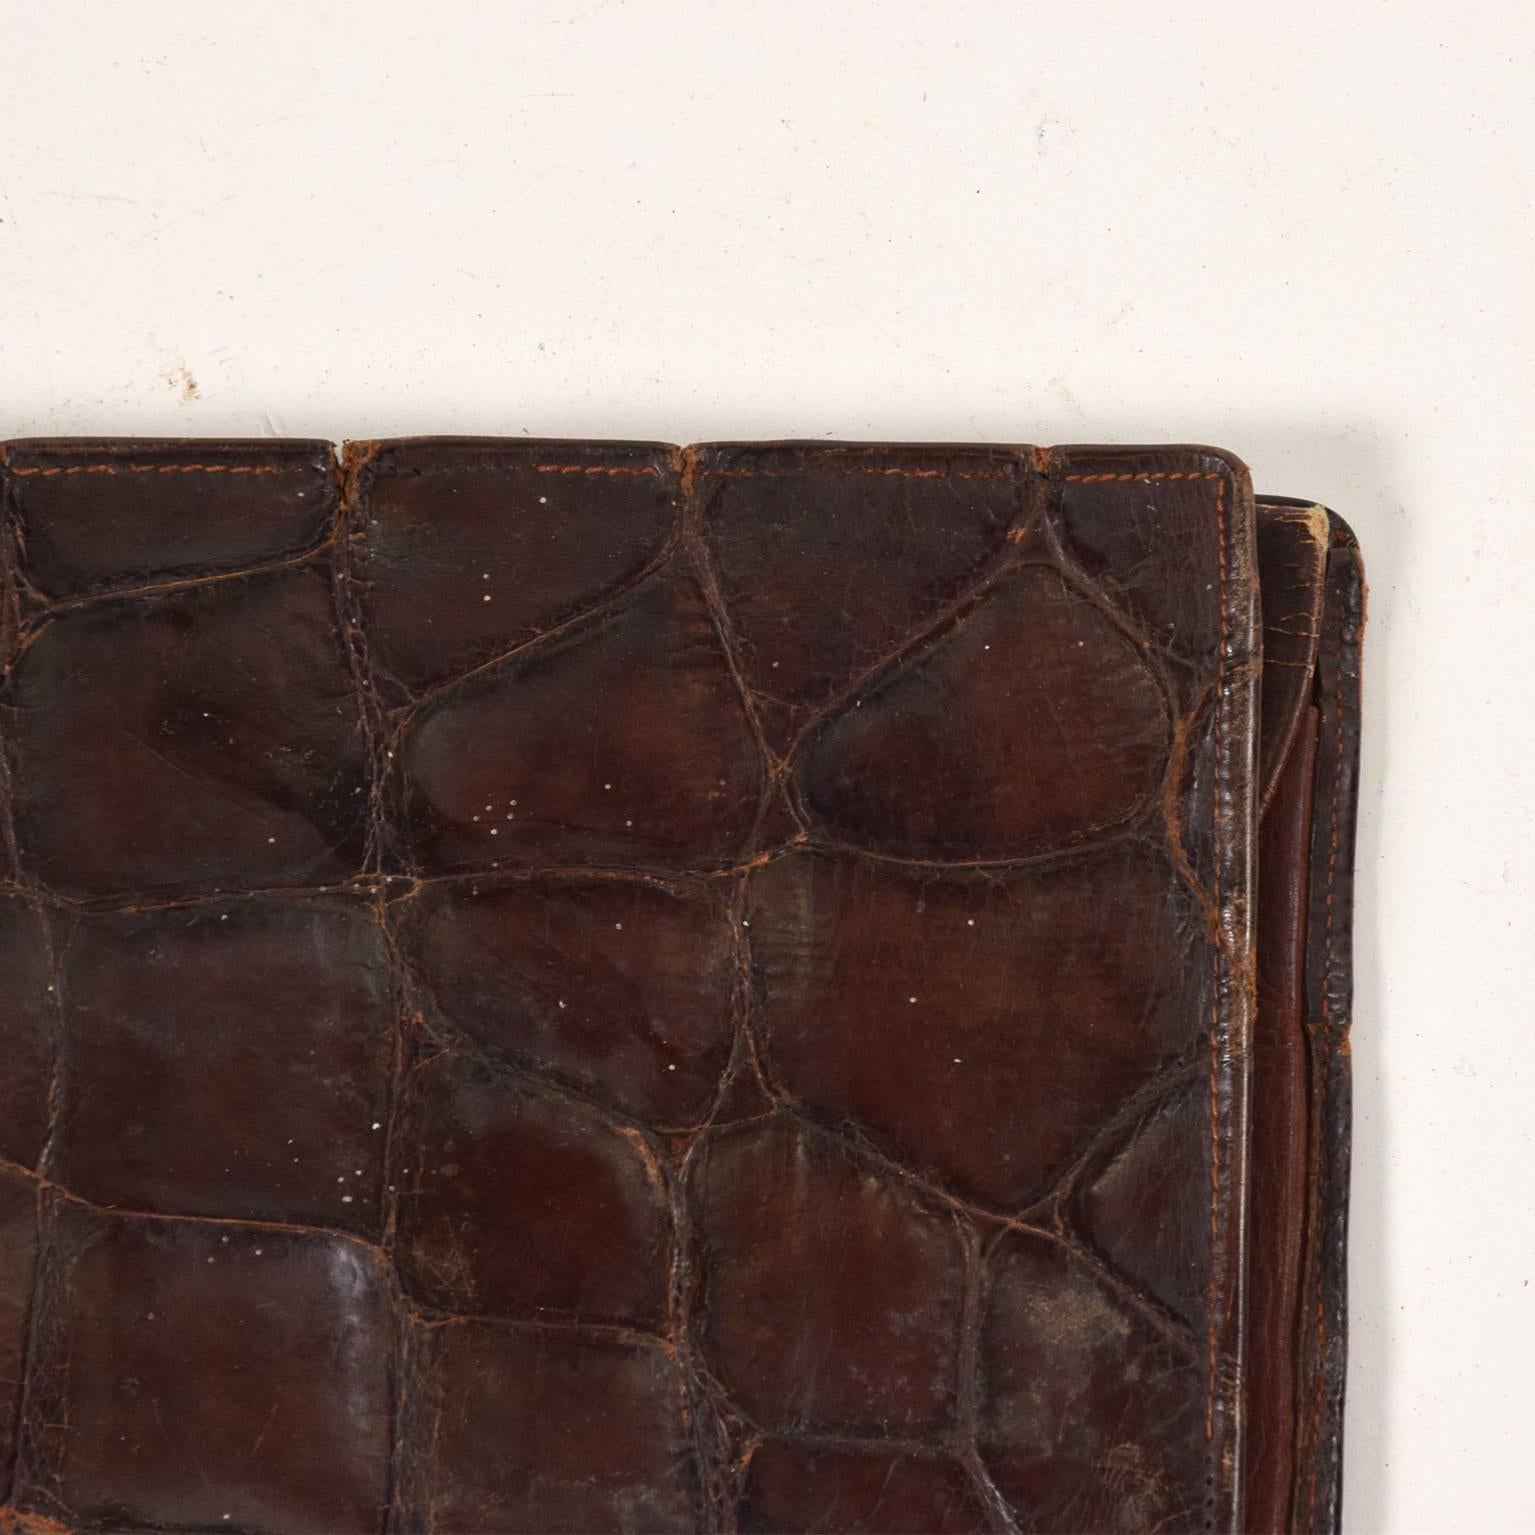 For your consideration, a vintage Italian wallet made of Crocodile leather.
Italy, circa 1950s.
Dimensions: 5 1/4